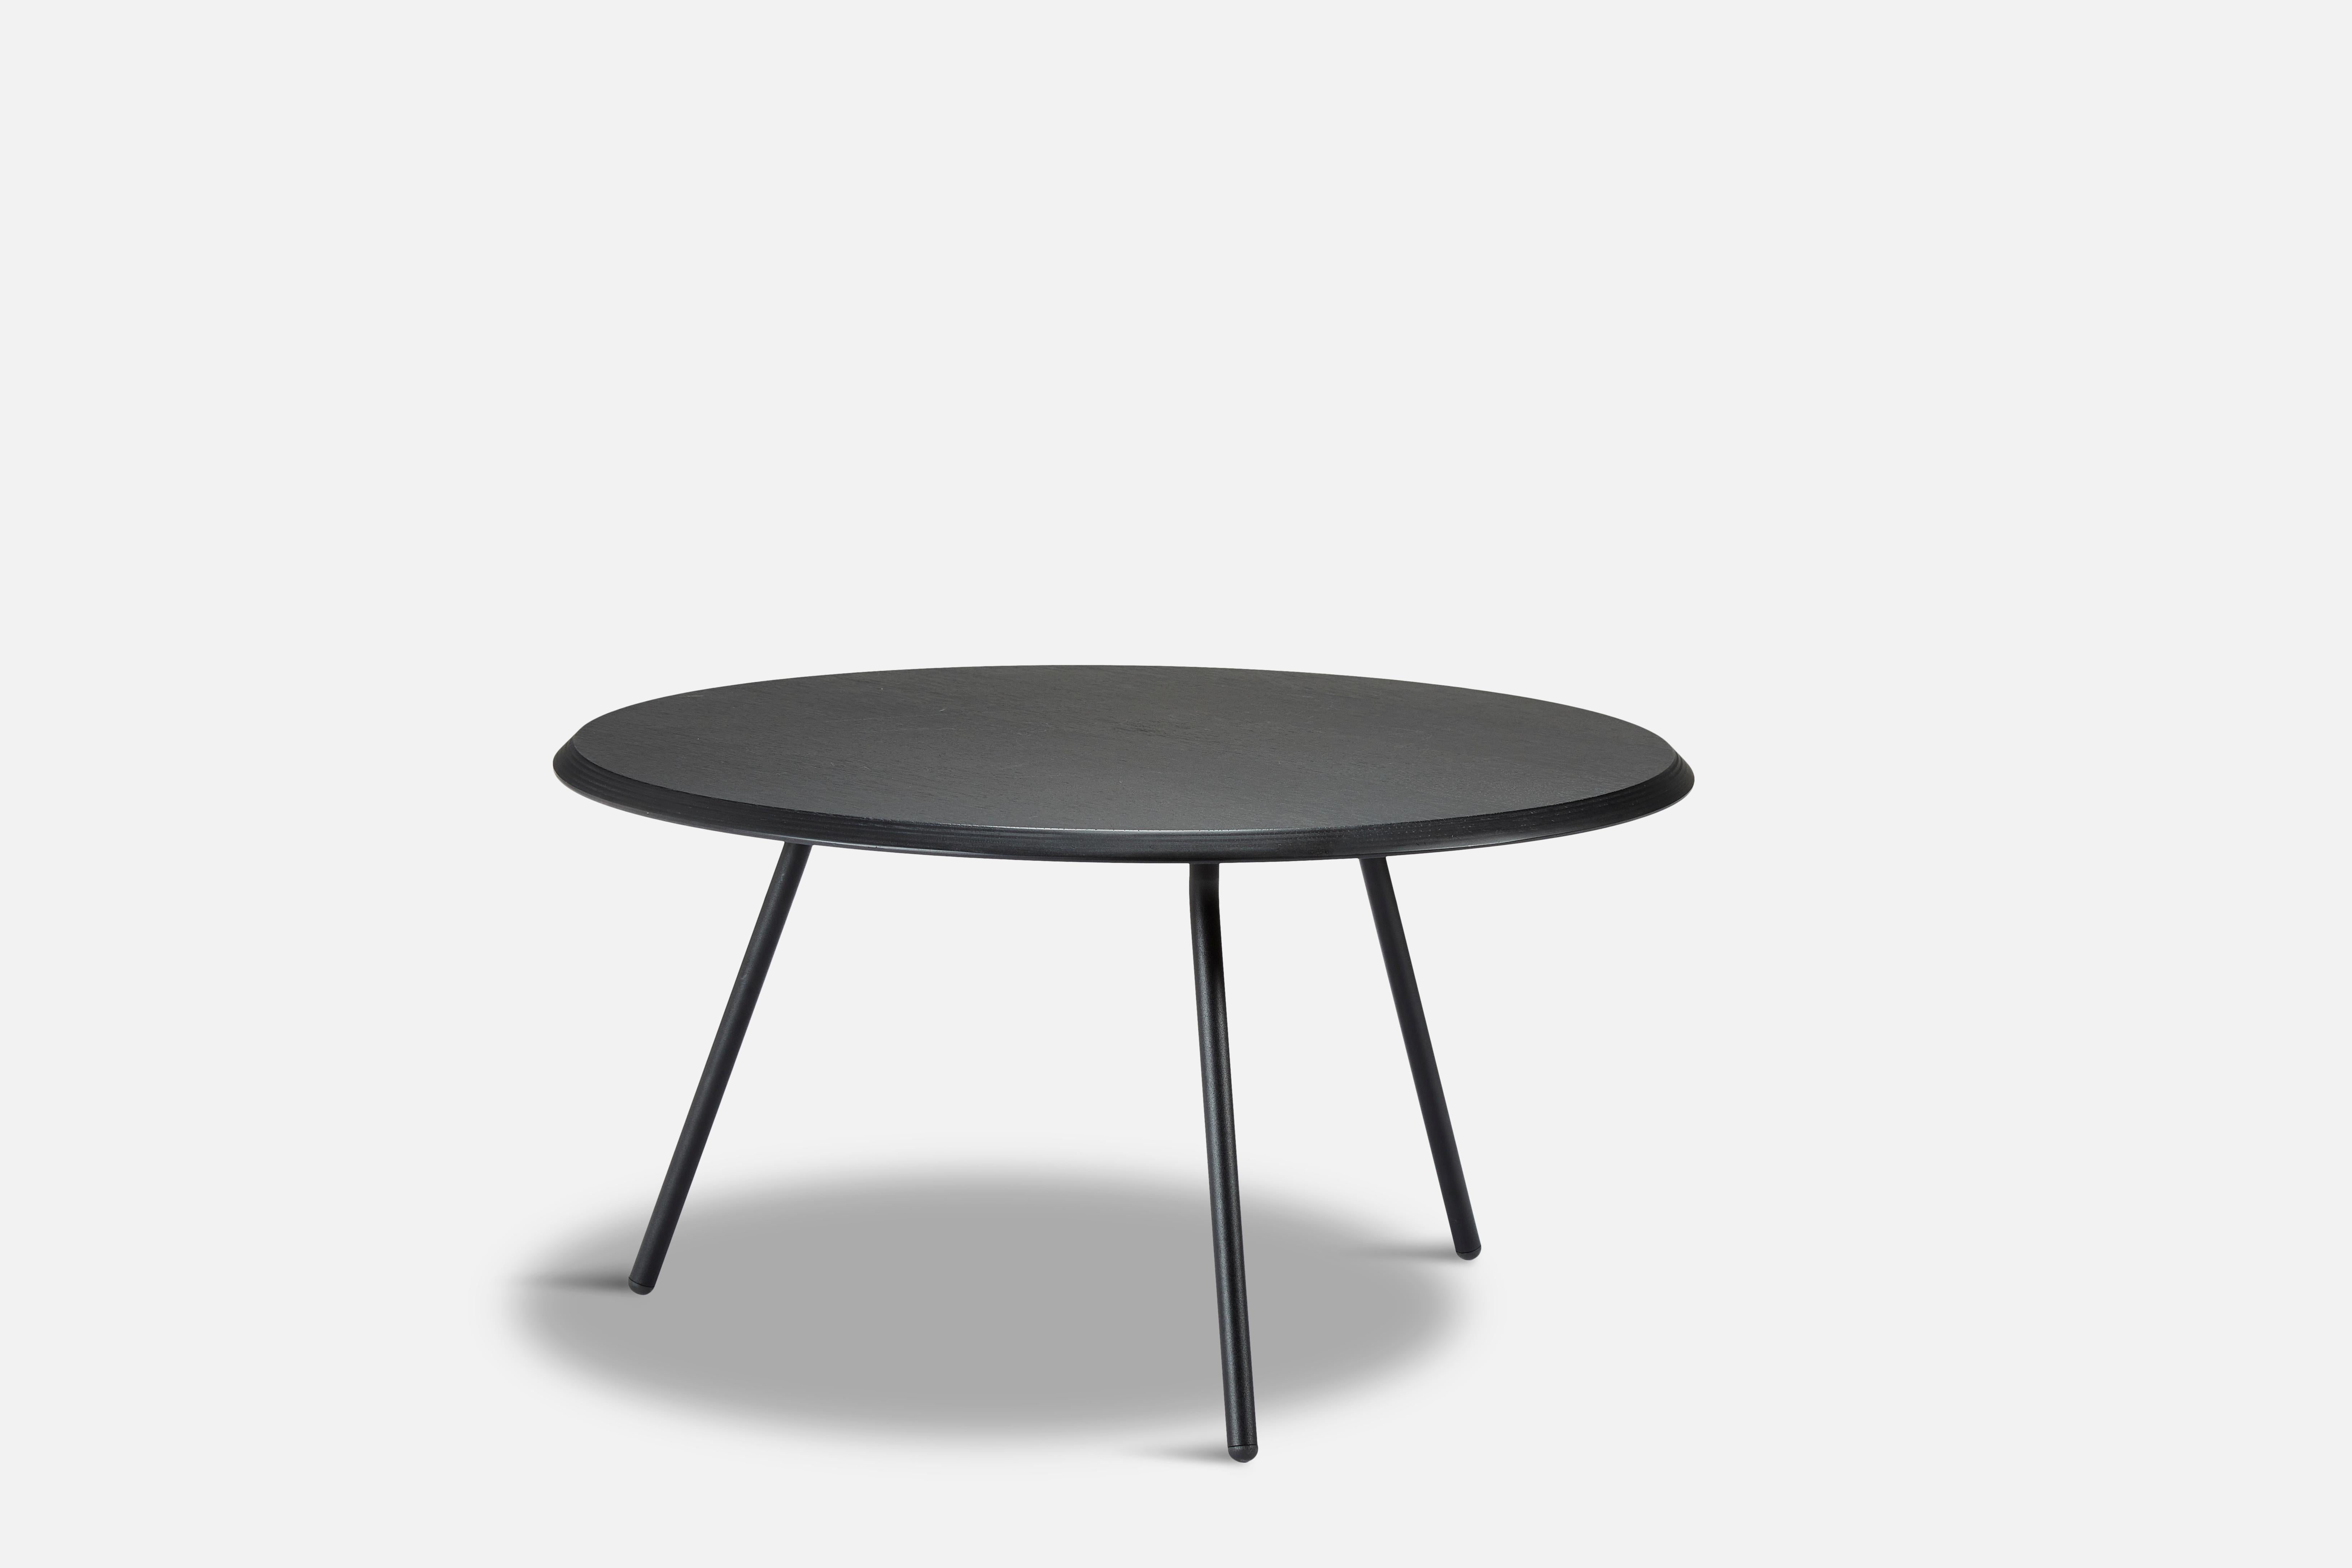 Black ash soround coffee table (Ø75 cm) by Nur design.
Materials: metal, ash.
Dimensions: D 75 x W 75 x H 49 cm.
Also available in different sizes.

The founders, Mia and Torben Koed, decided to put their 30 years of experience into a new